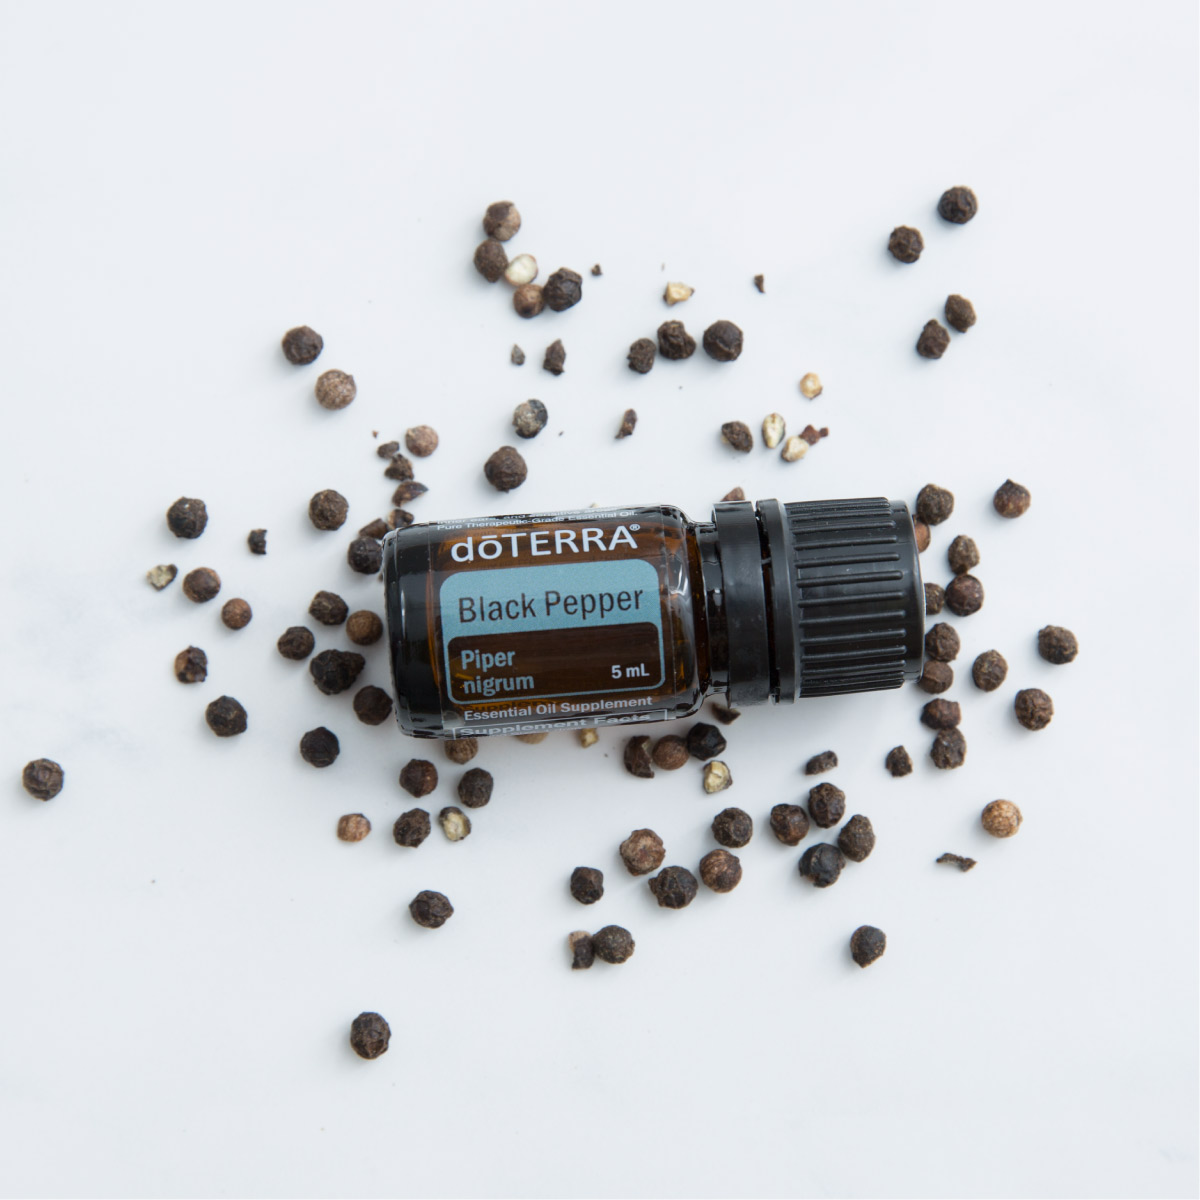 Black Pepper essential oil bottle with fruit from a black pepper plant. How is Black Pepper essential oil made? Black Pepper essential oil is made by steam distilling the fruit of the Piper nigrum plant.